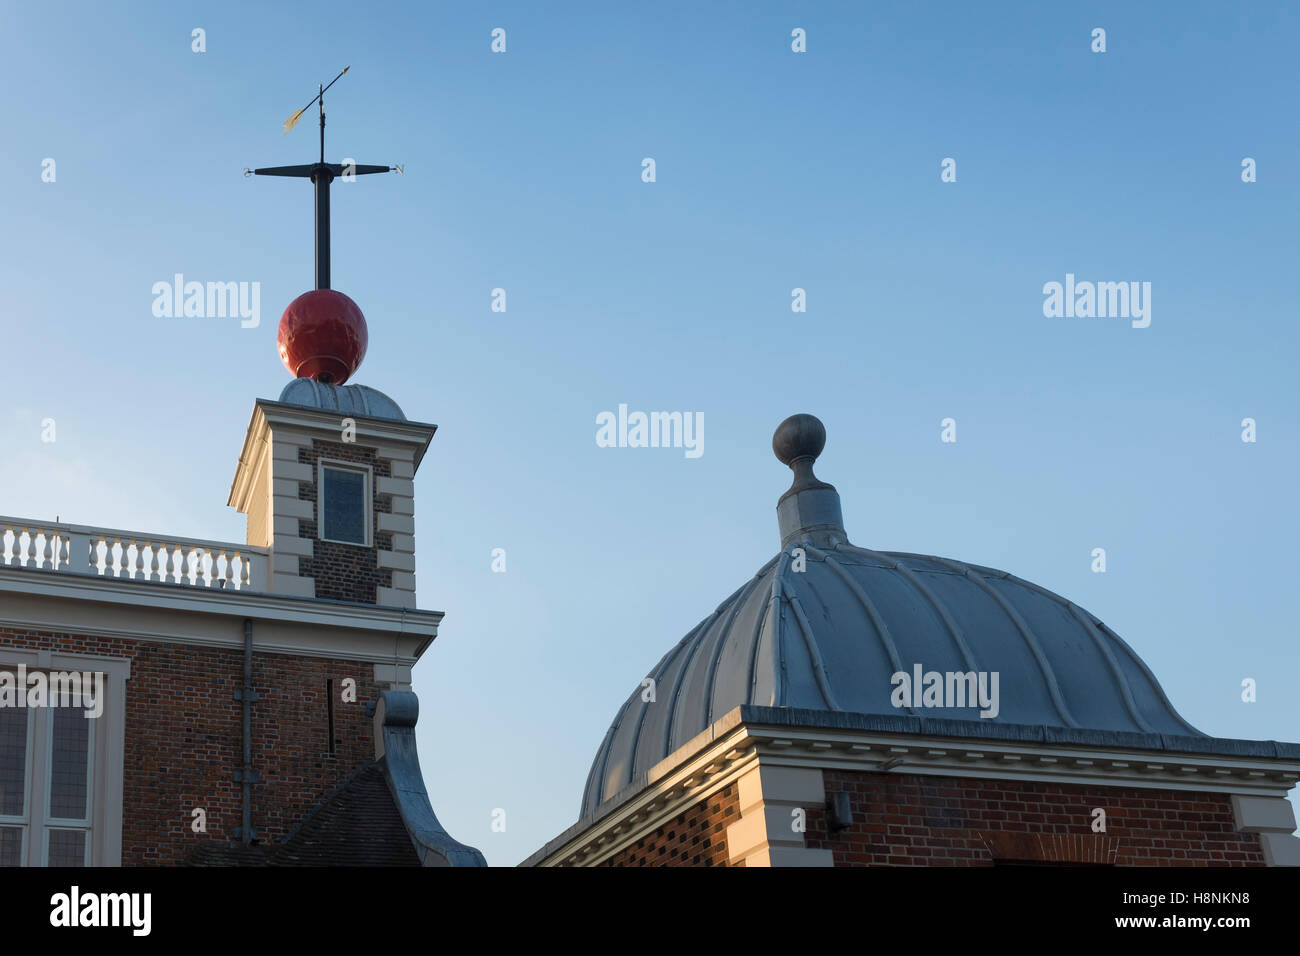 The red 'time ball' and weathervane on top of Flamstead House, part of the Royal Observatory at Greenwich. Stock Photo